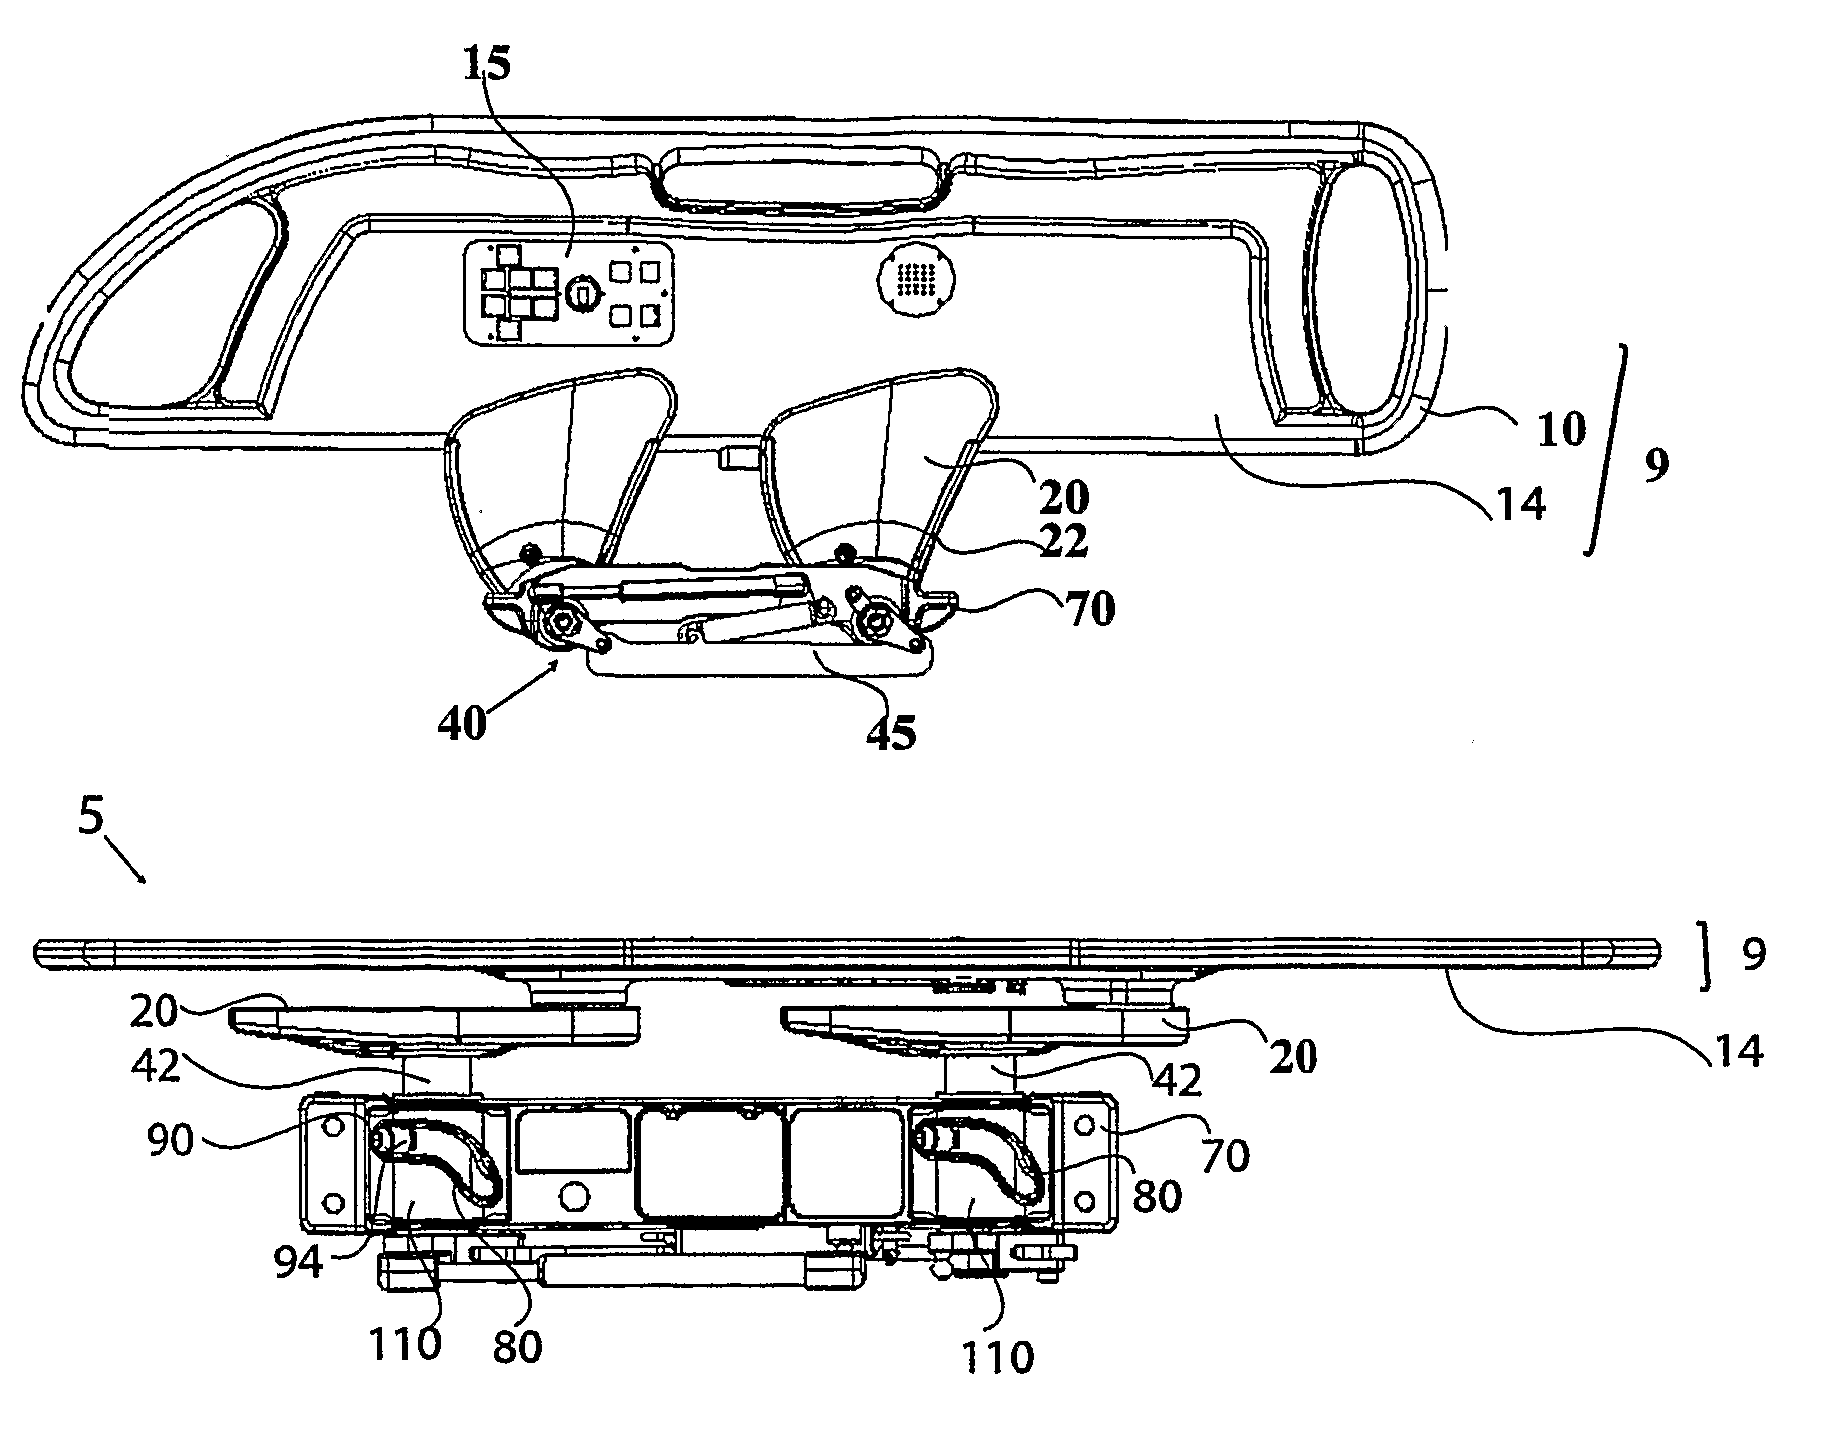 Movable siderail apparatus for use with a patient support apparatus